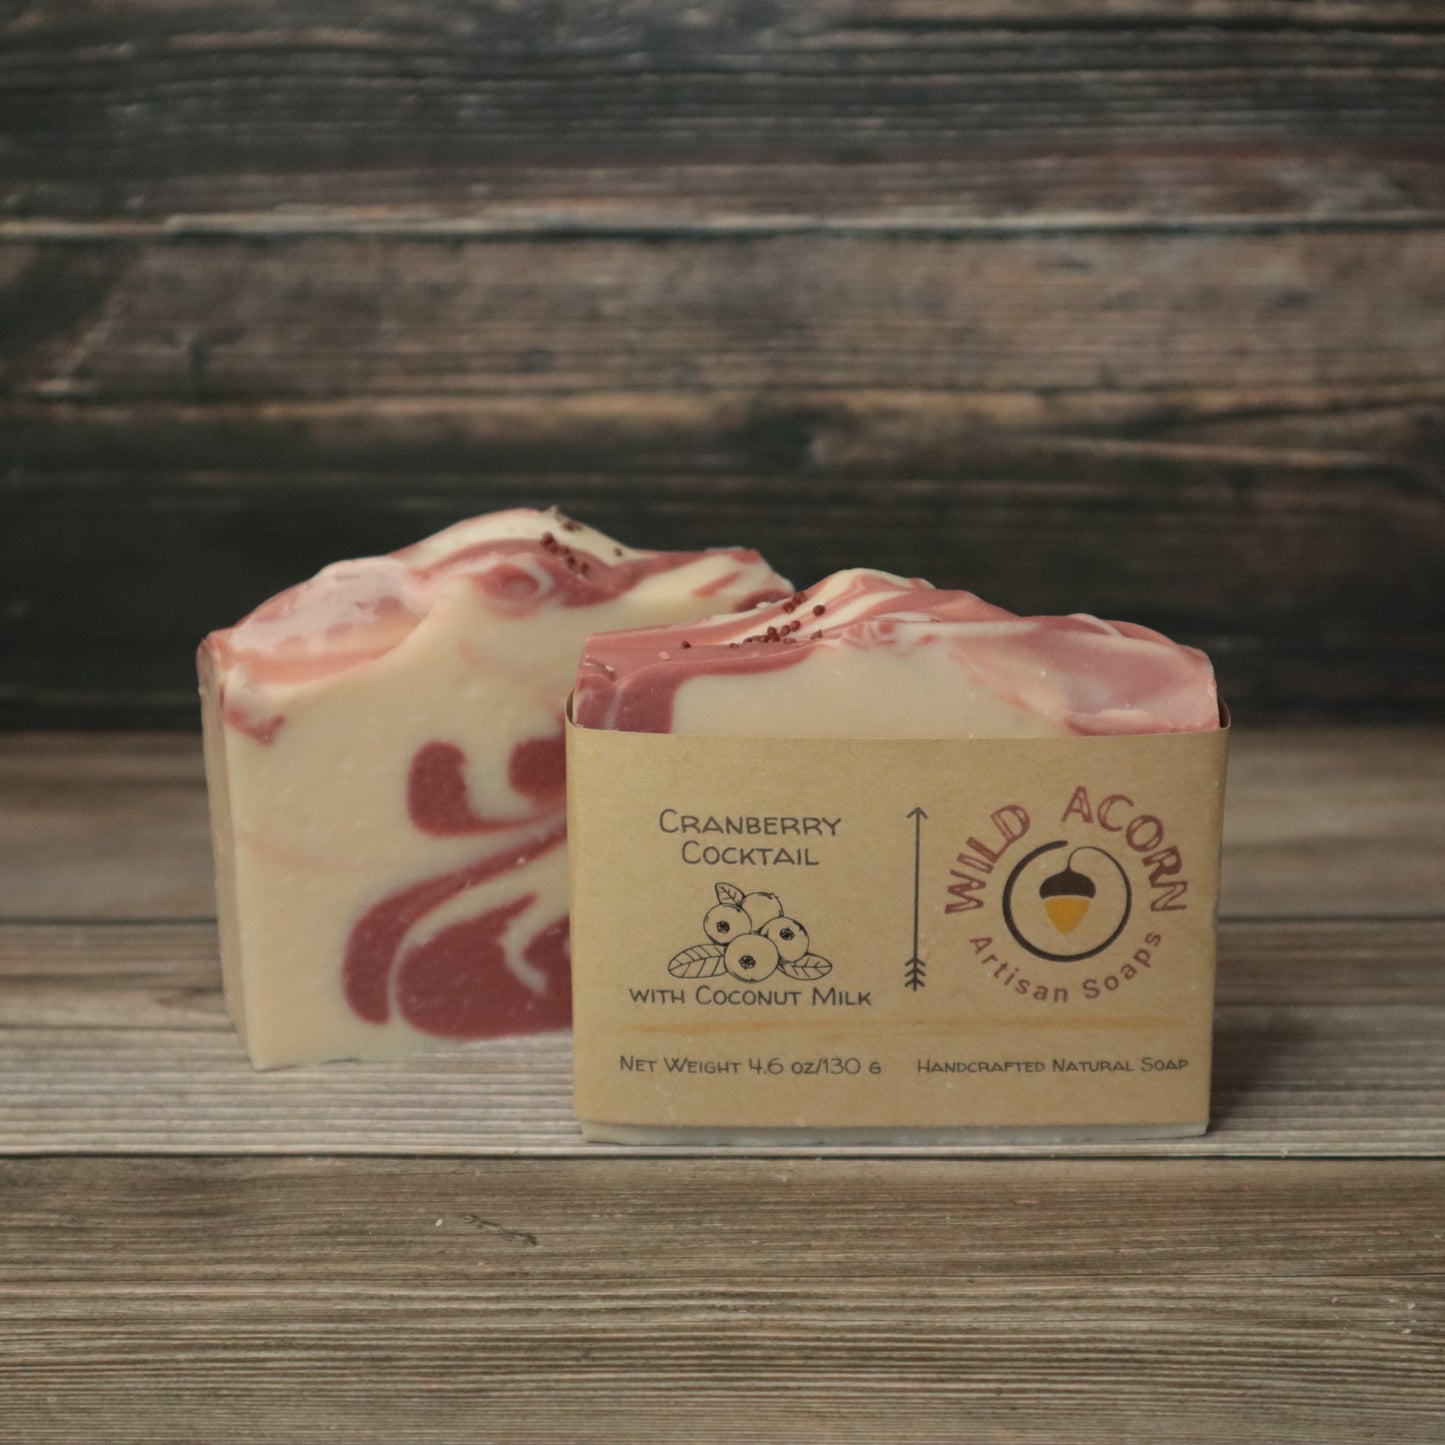 2 bars of soap, cream colored with red swirls and tiny red cranberry seeds on top.